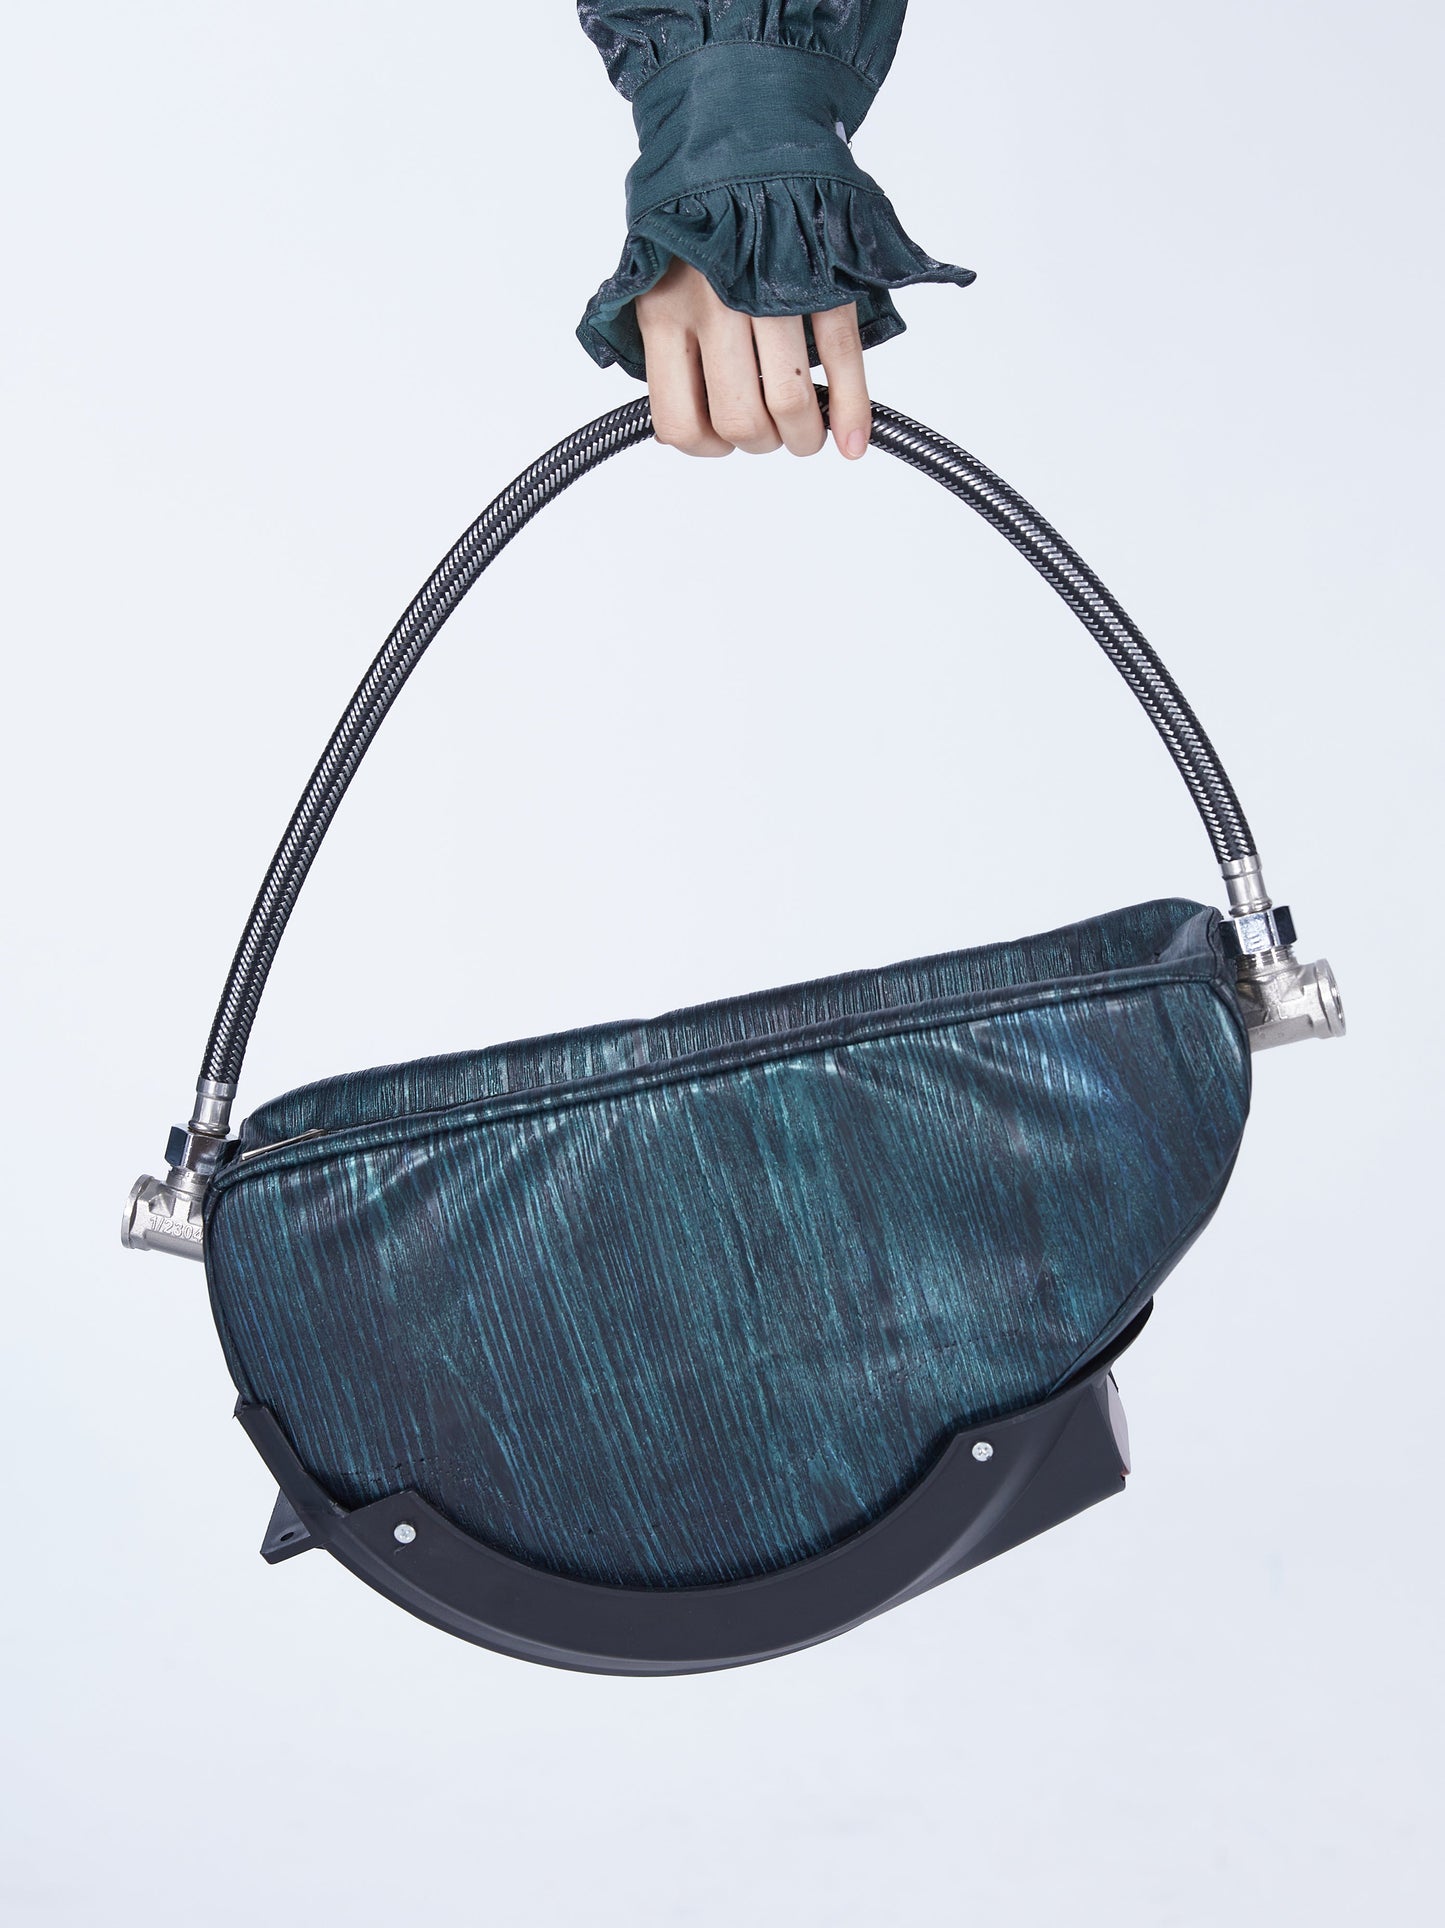 Special-shaped embossed bag